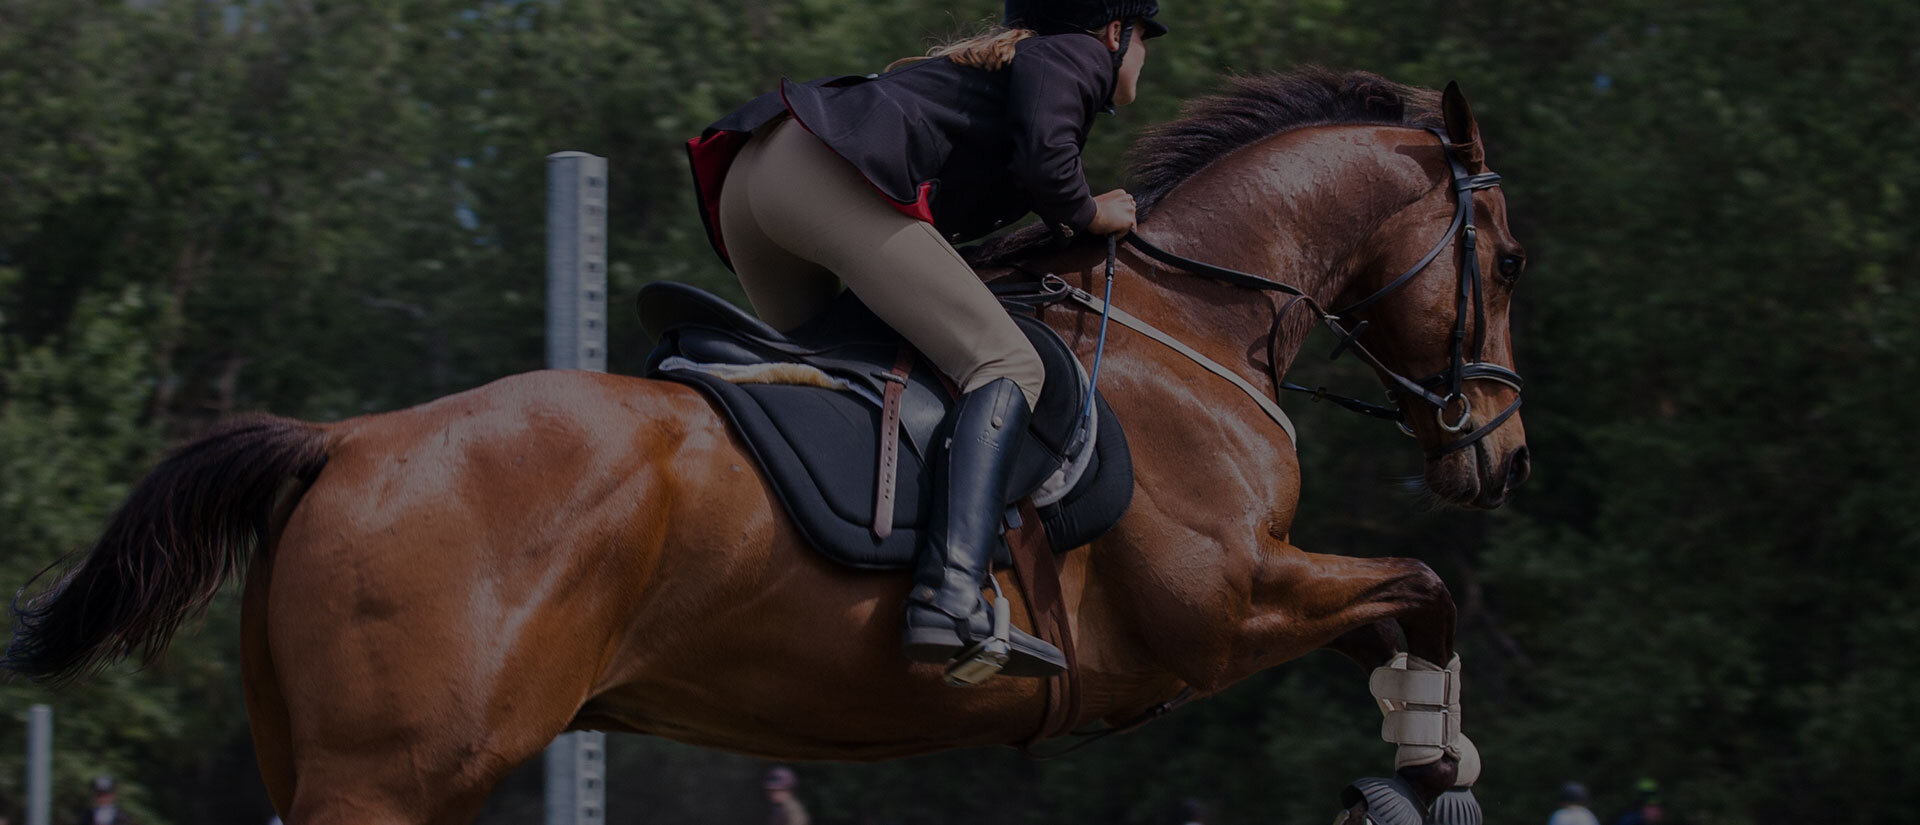 Our wellness plans keep your  equine athlete in top form.